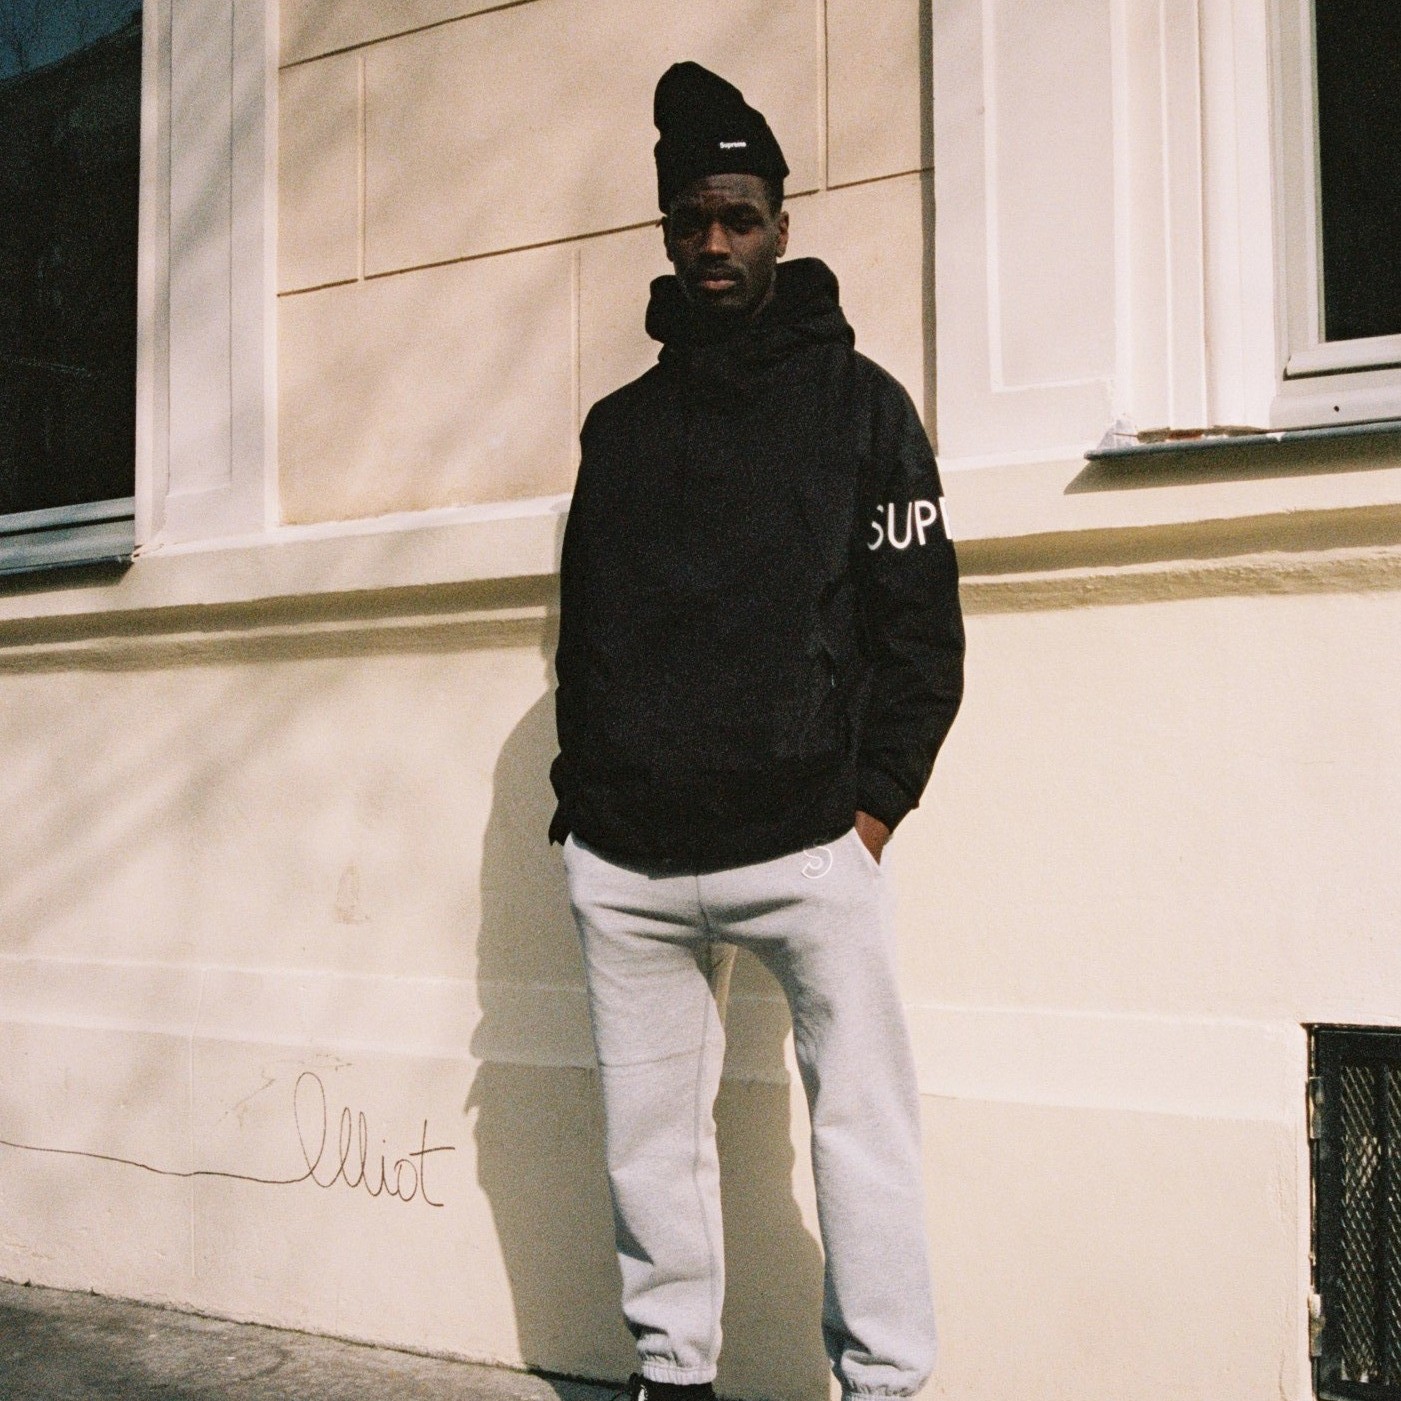 meet supreme's french team